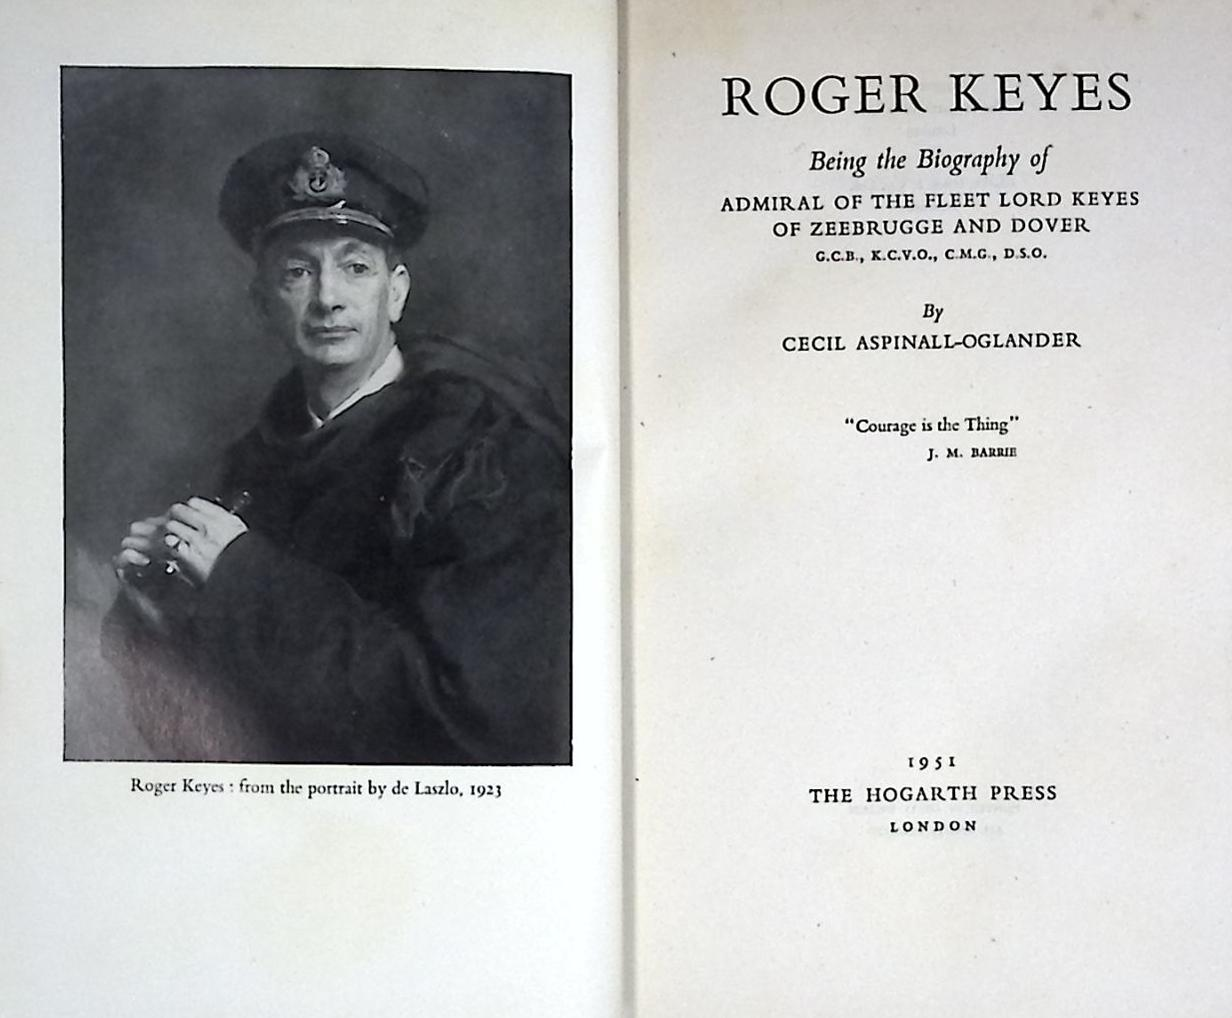 Roger Keyes. Being the Biography of Admiral of the Fleet Lord Keyes.